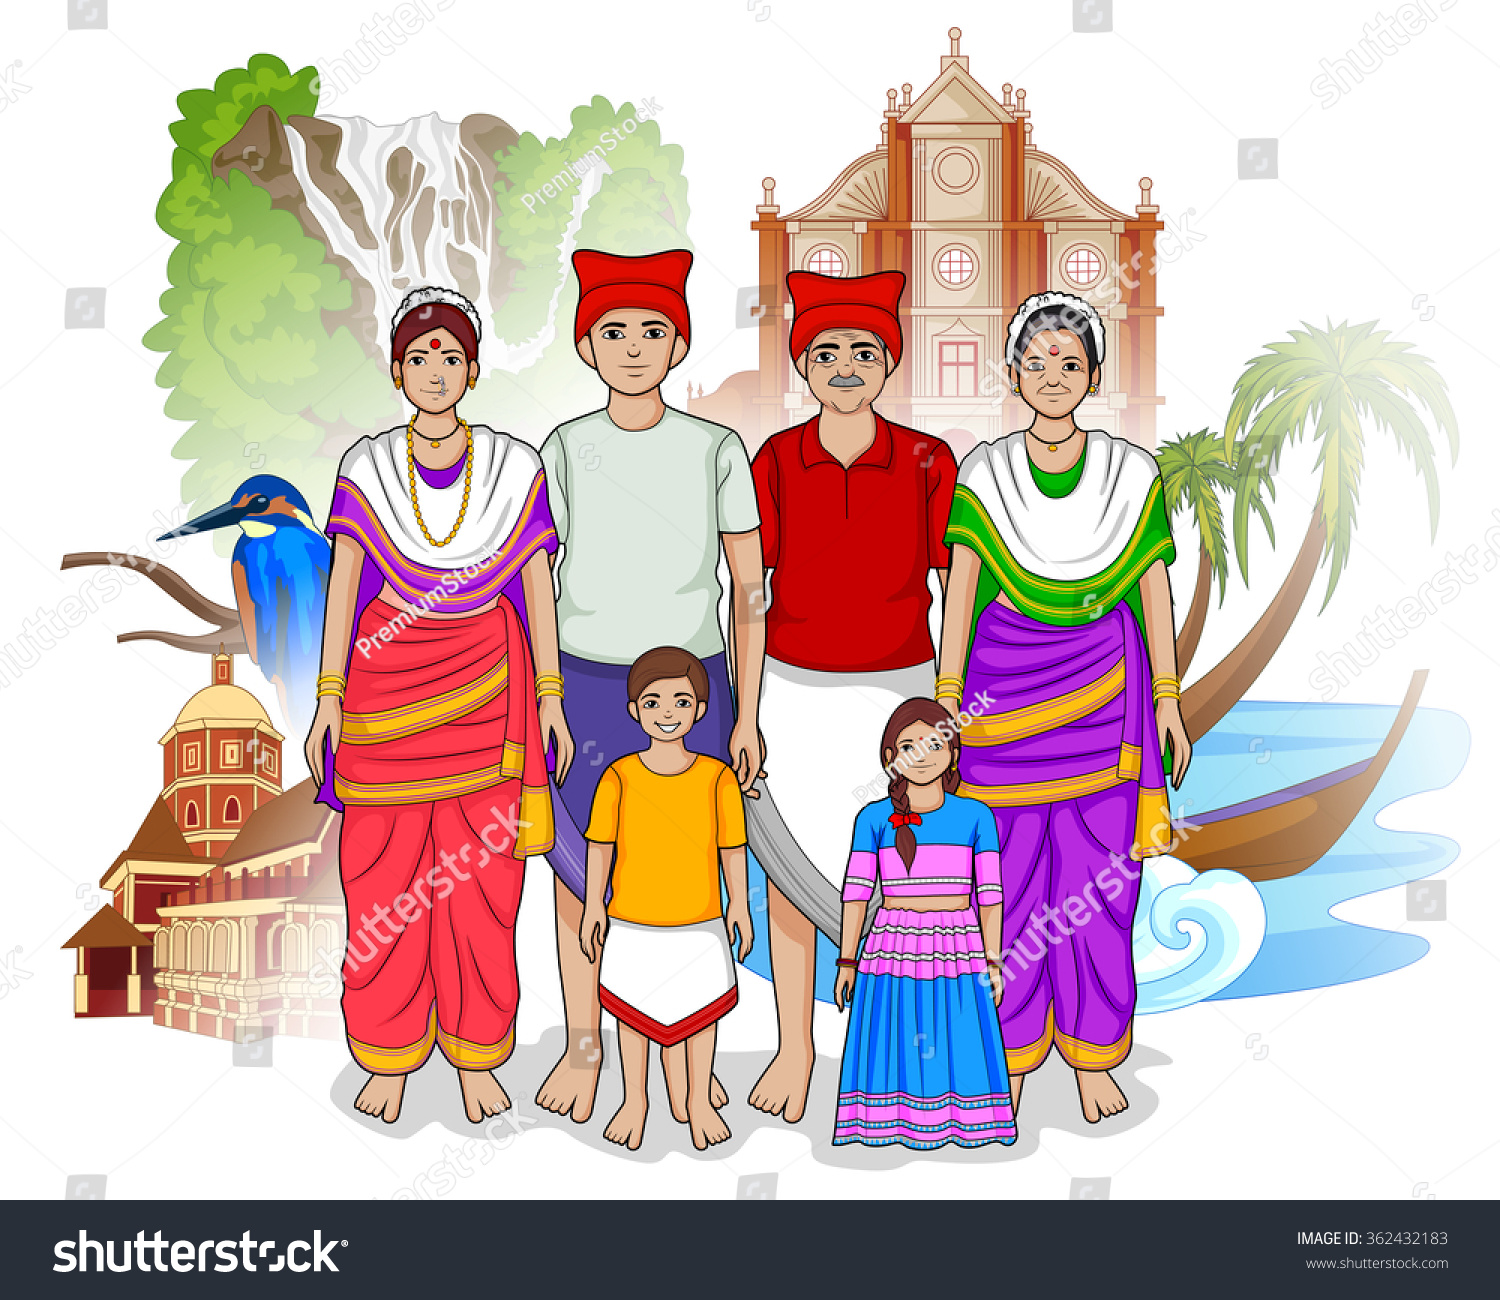 indian family clipart free download - photo #21